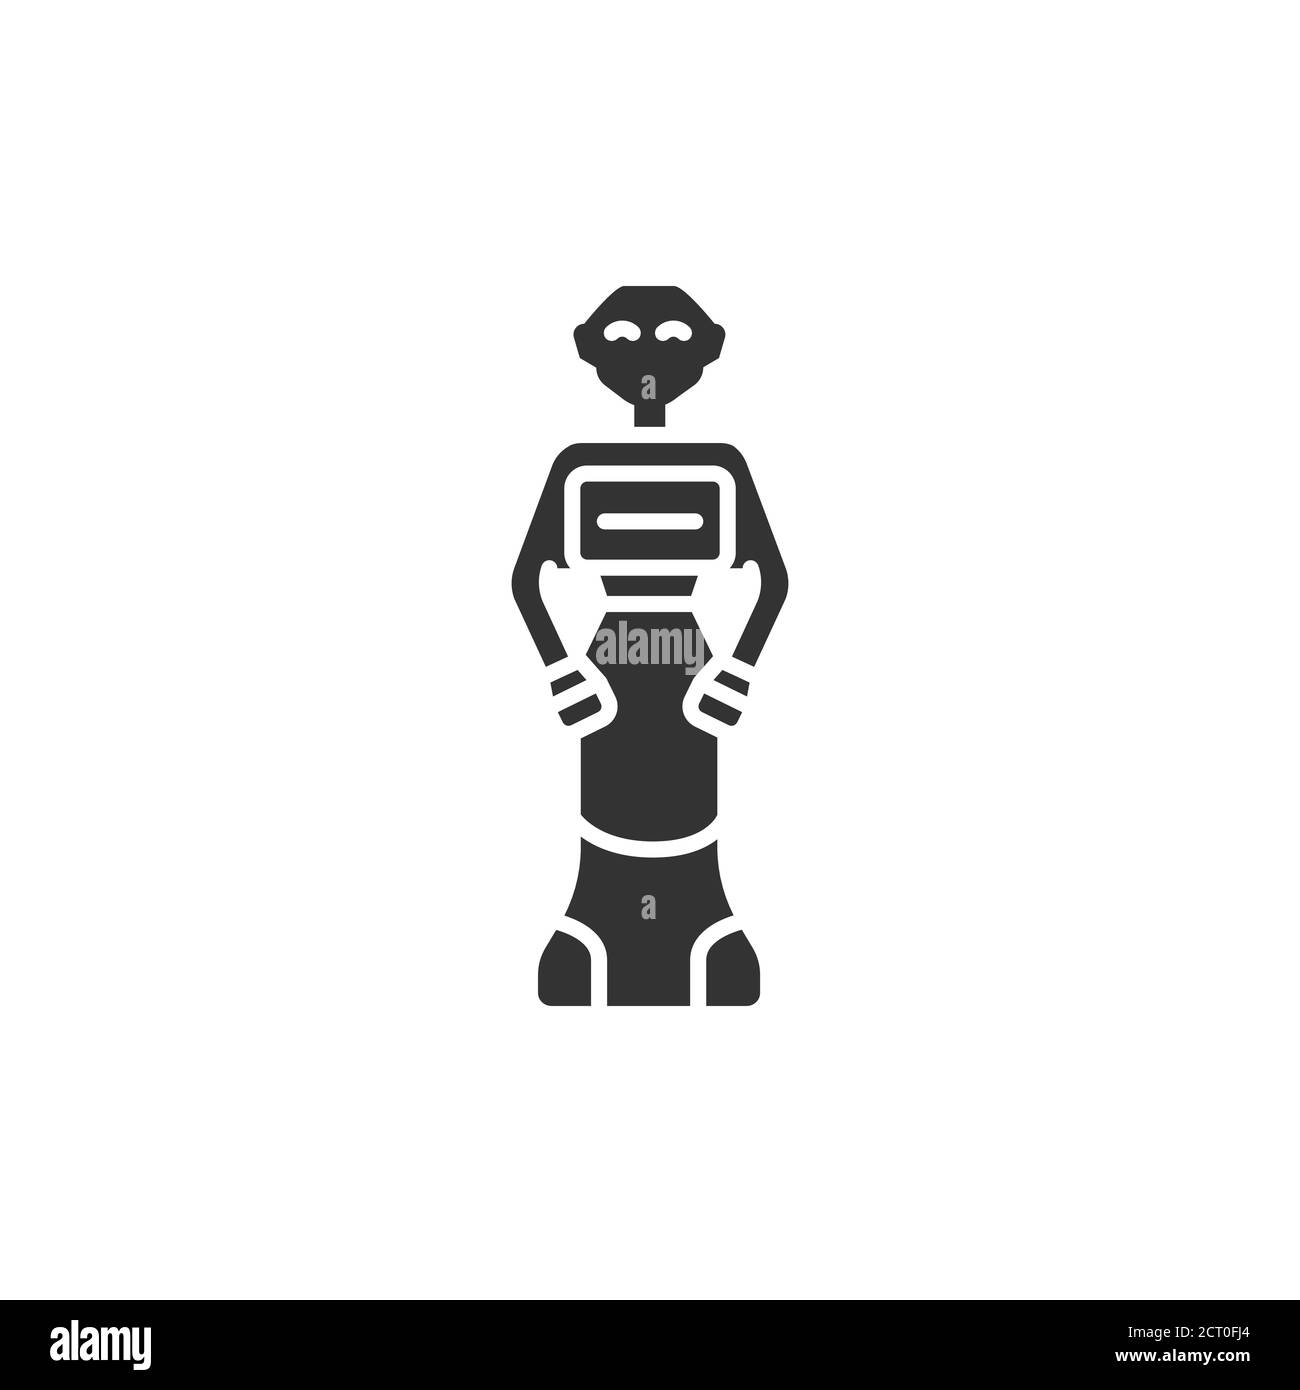 Social robot black glyph icon. Communication with people in public places. Innovation in technology. Sign for web page, app. UI UX GUI design element. Stock Vector